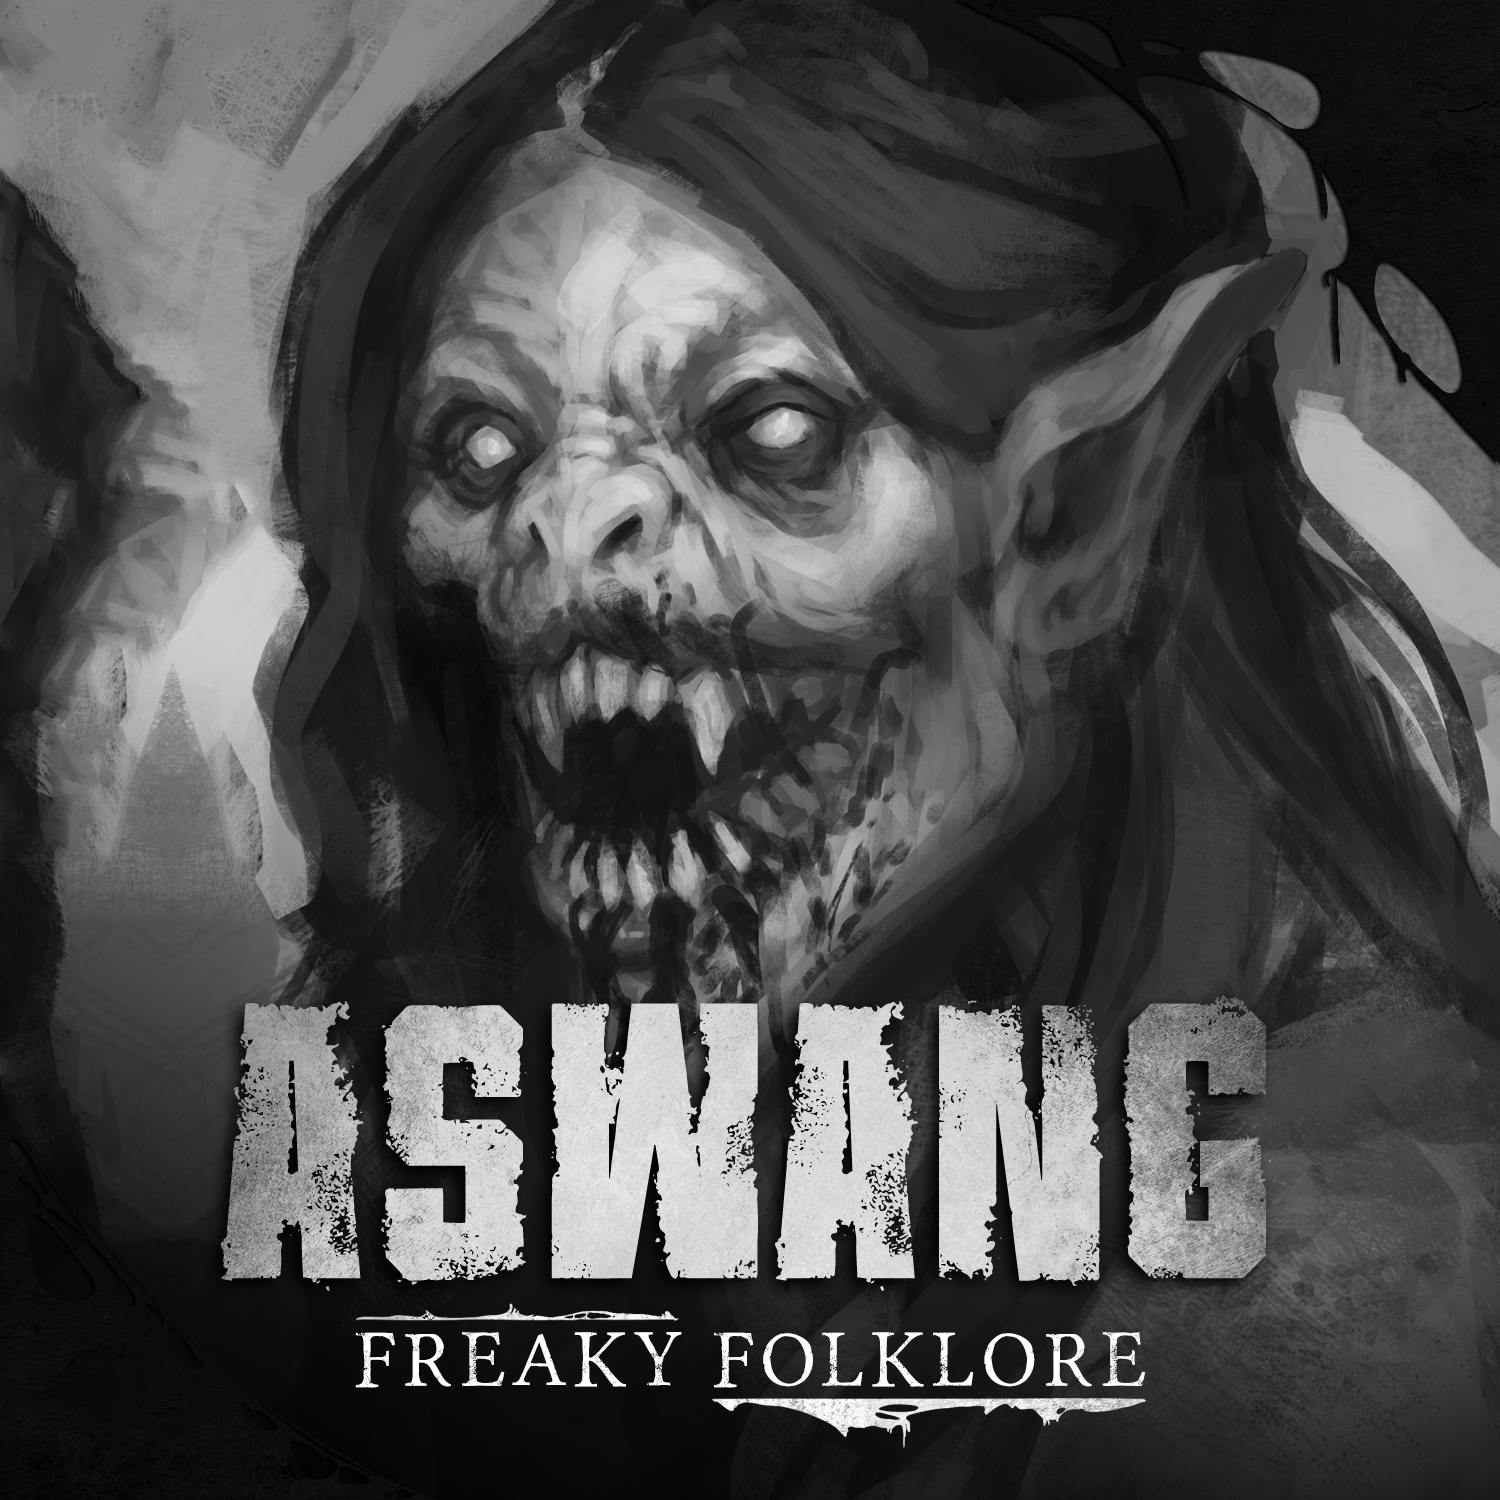 Aswang - The Boogeyman of the Philippines